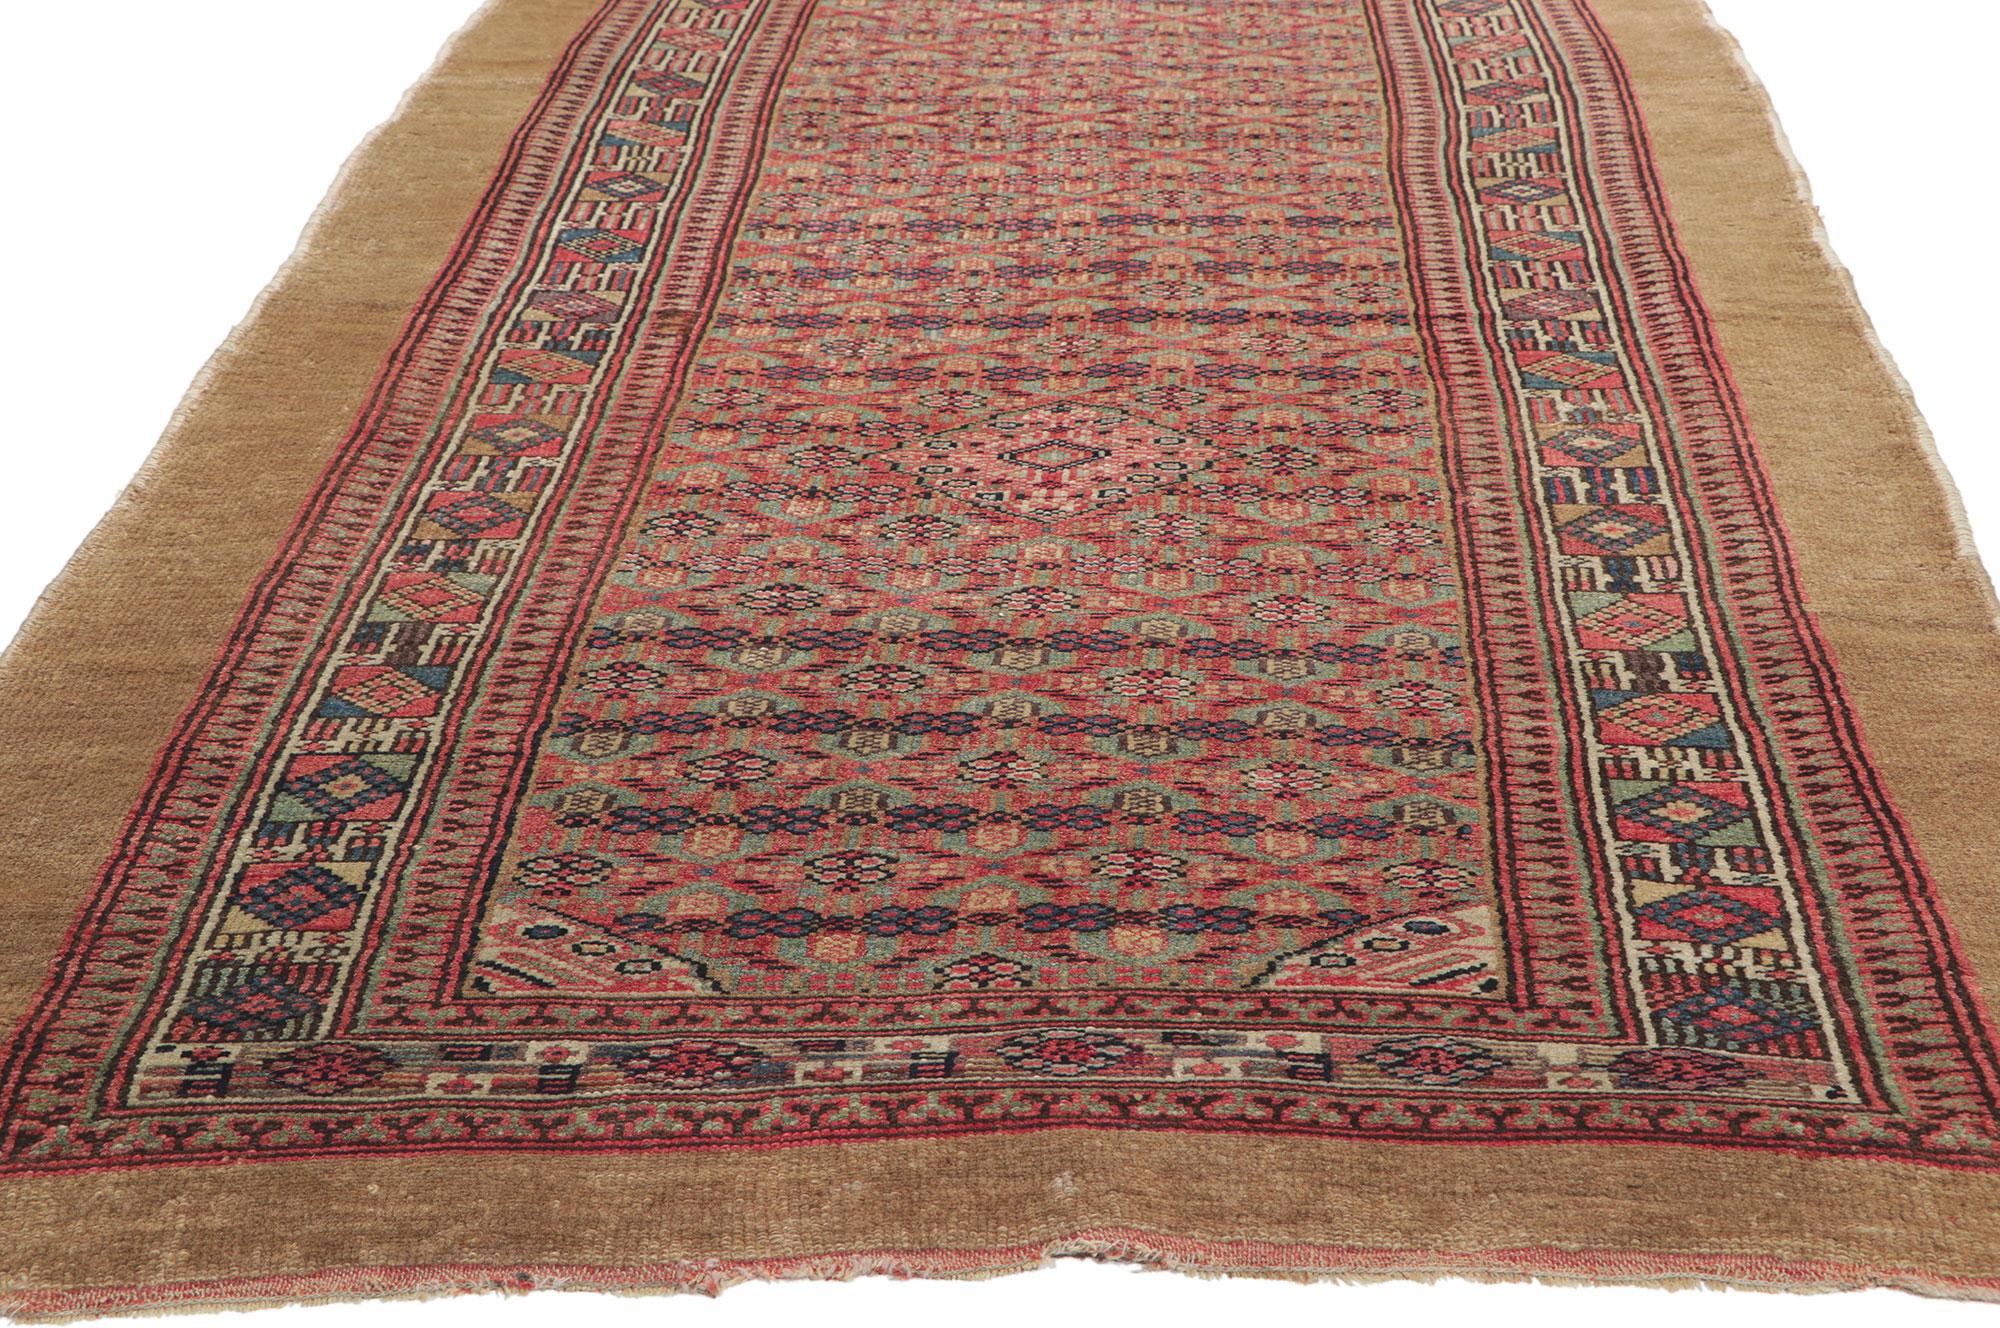 Antique Persian Malayer Runner with Camel Hair In Good Condition For Sale In Dallas, TX